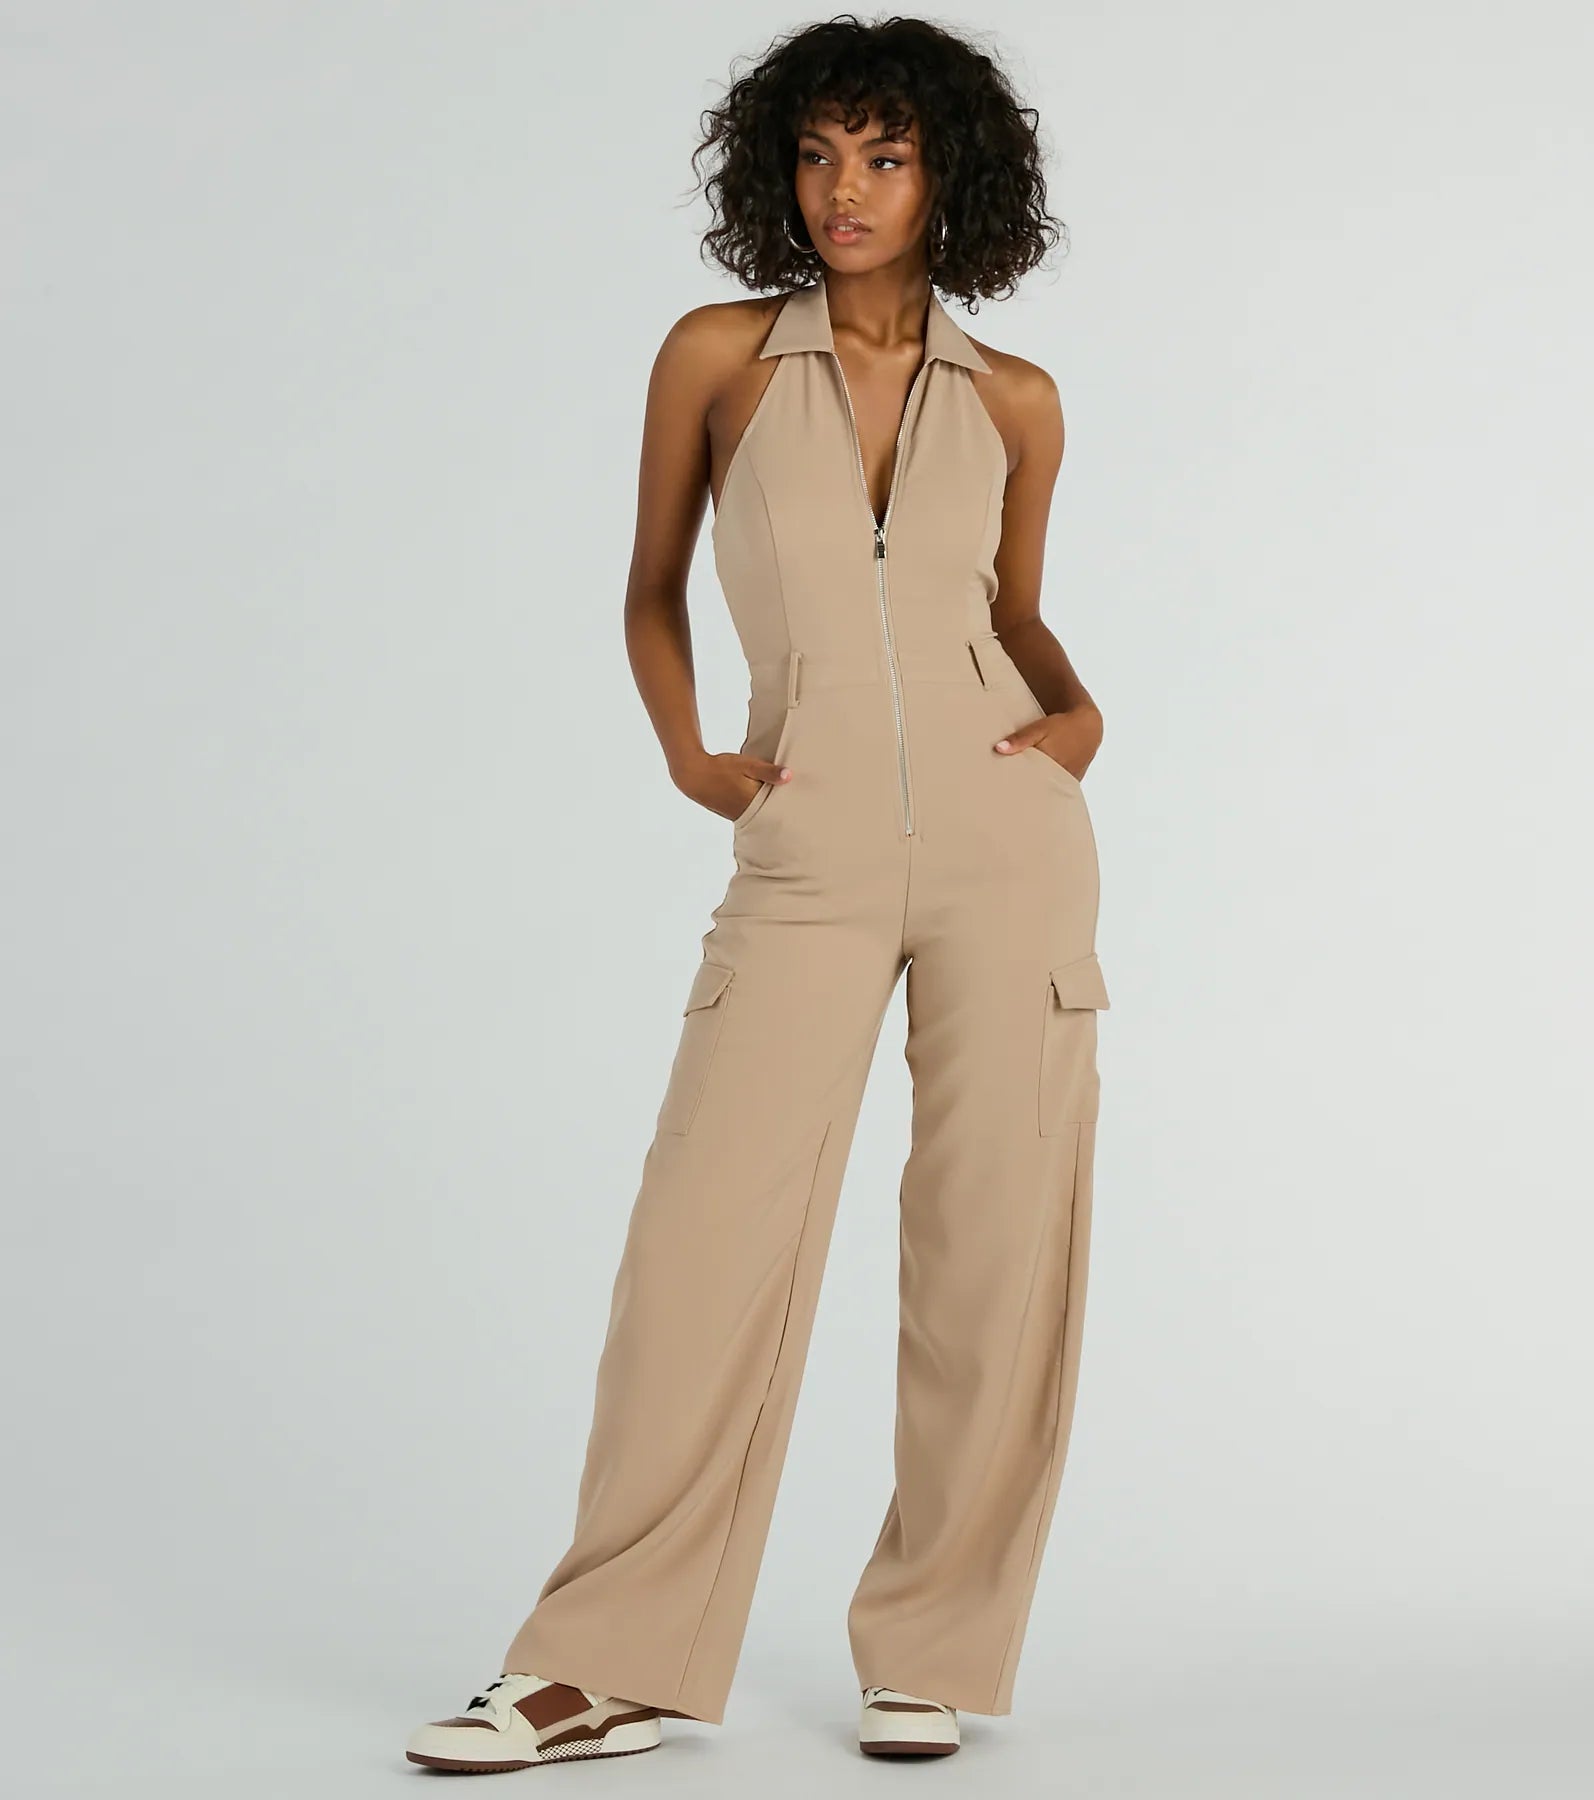 Collared Halter Sleeveless Front Zipper Open-Back Pocketed Jumpsuit